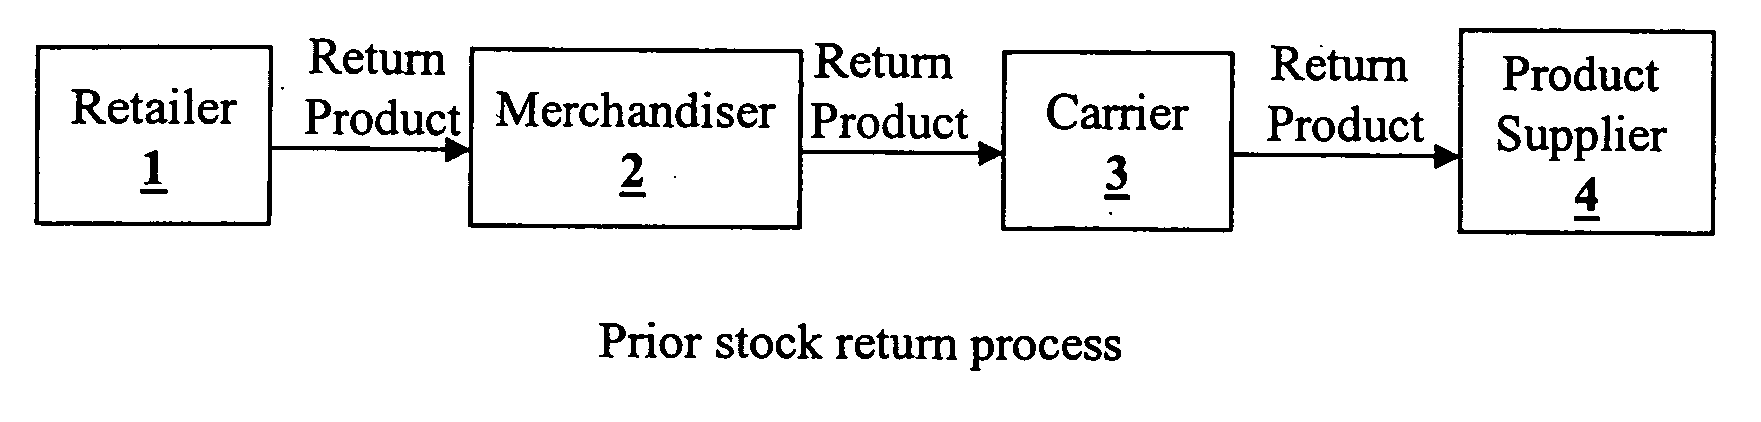 Systems and methods for facilitating stock product returns